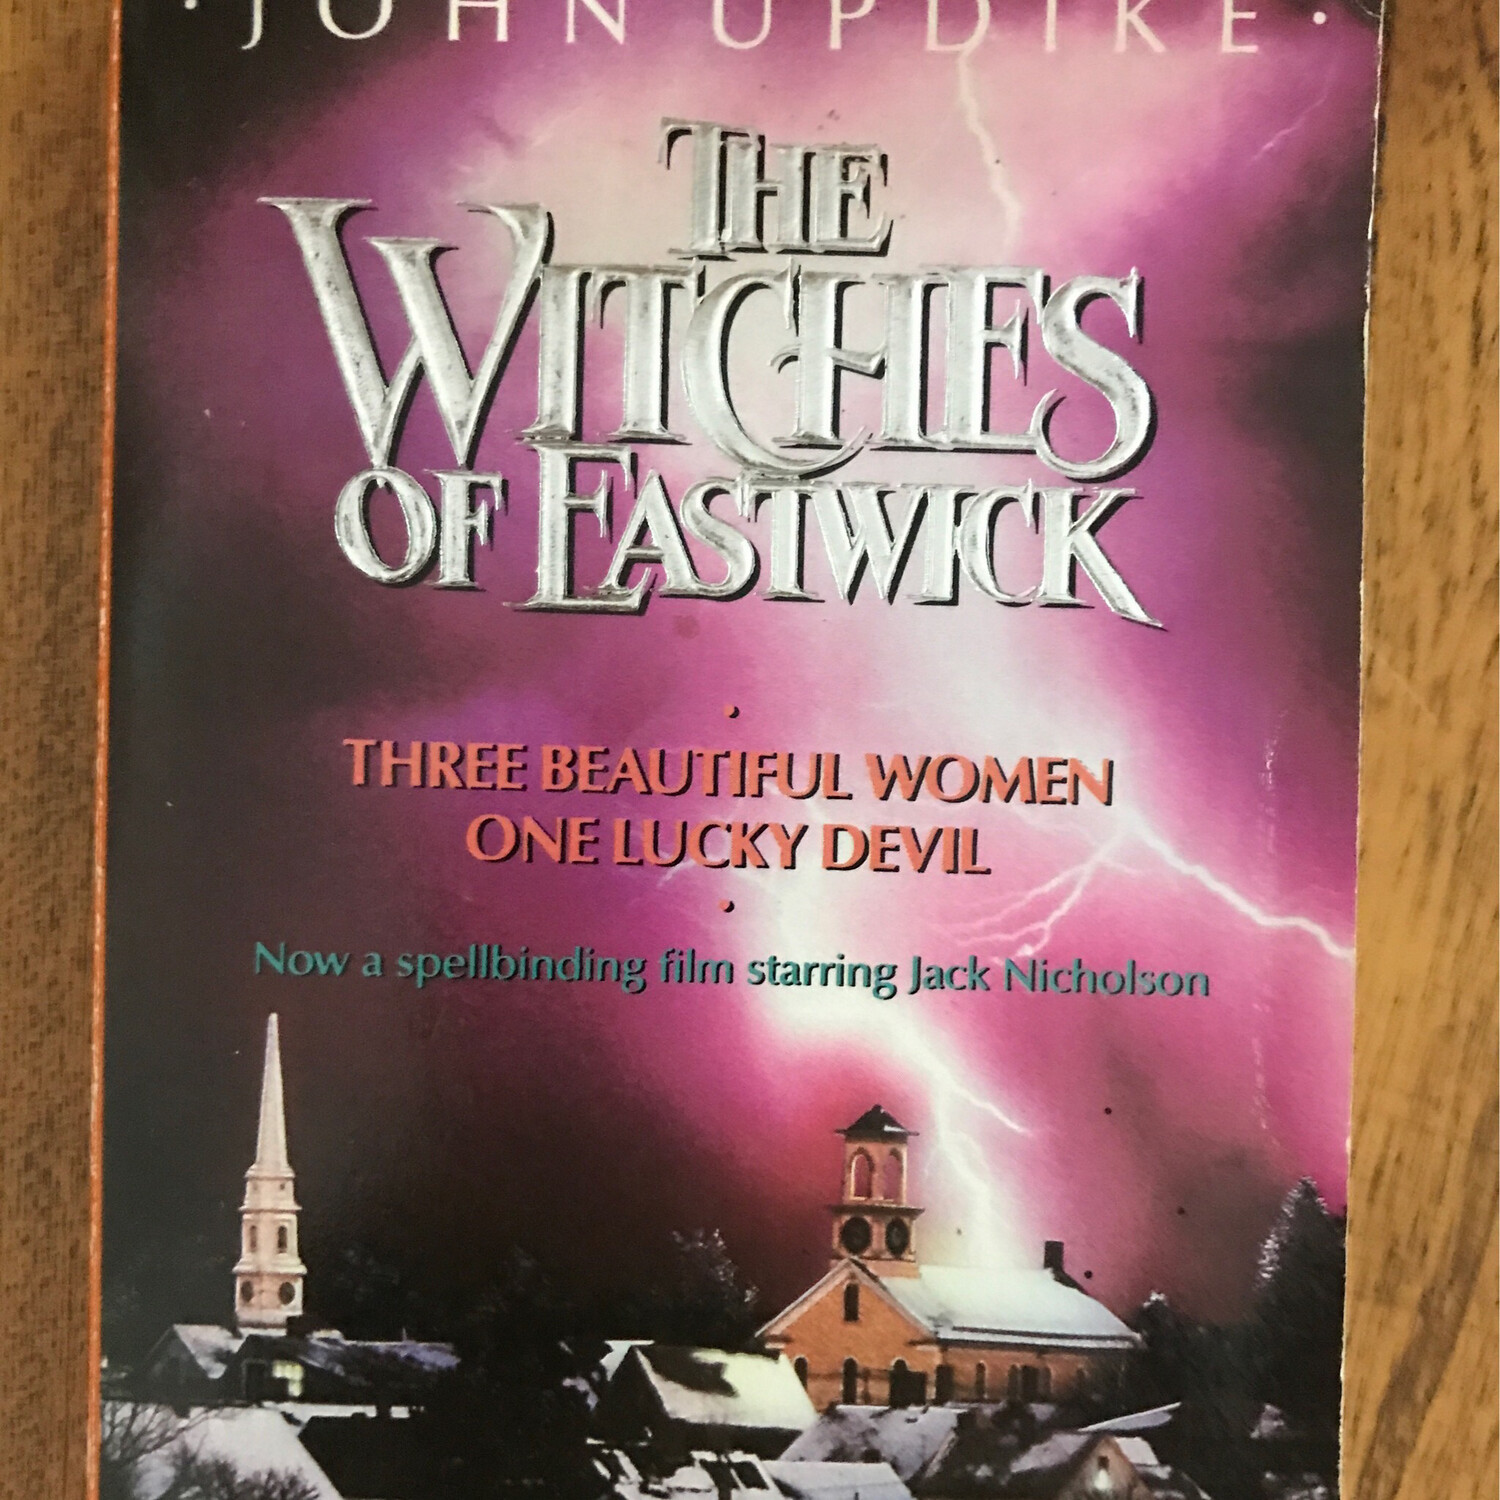 The Witches Of Eastwick, John Updike